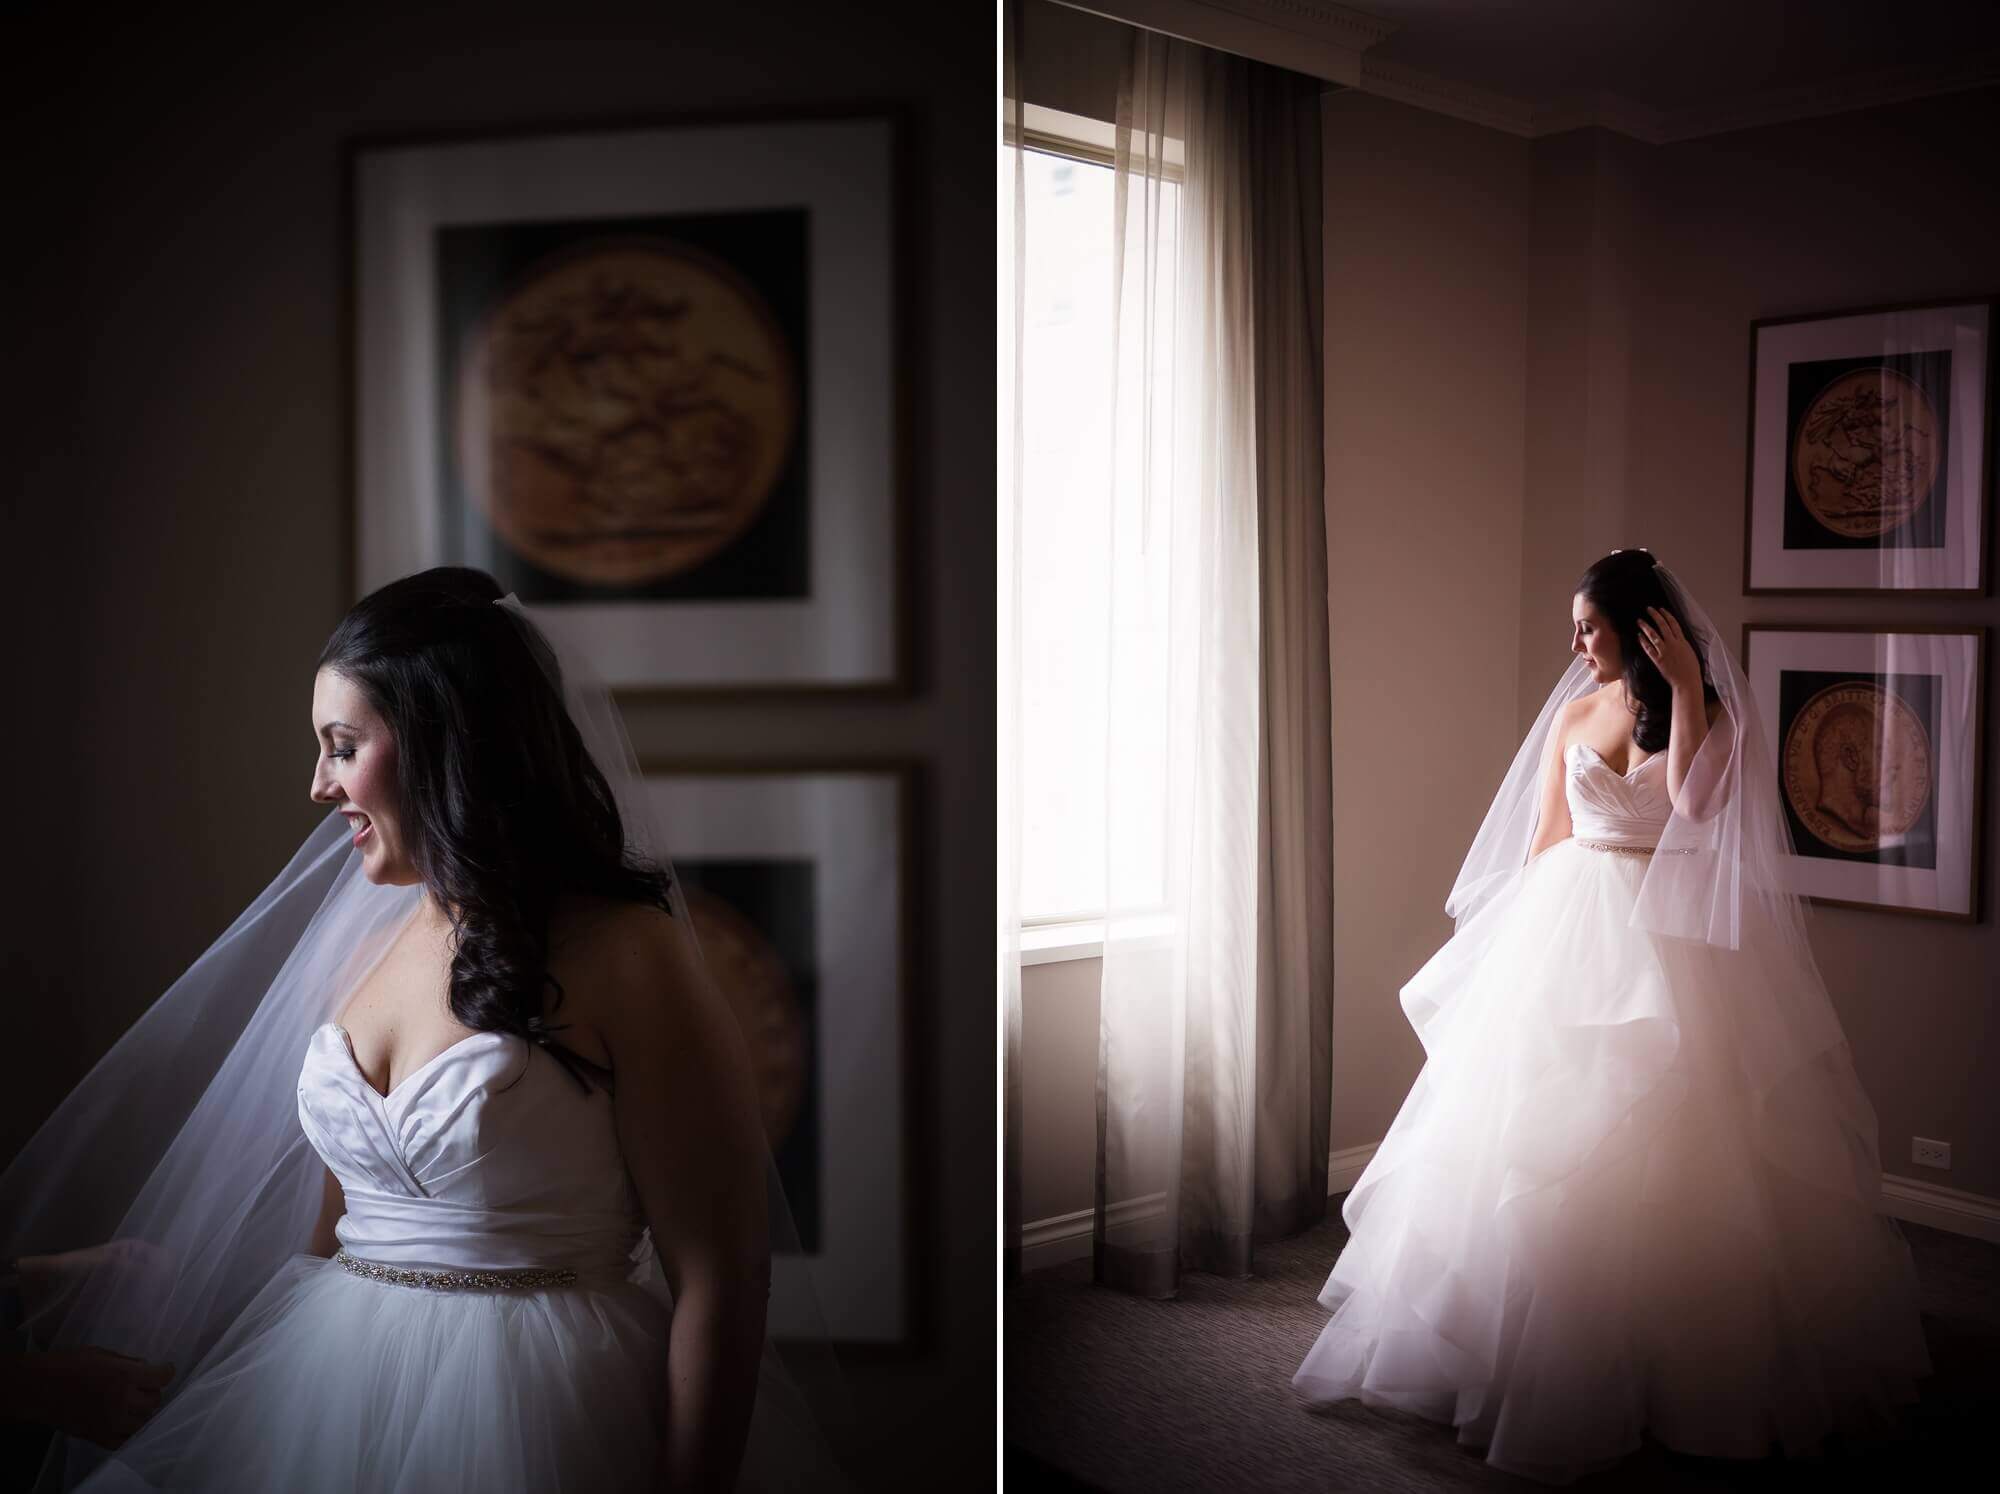 Luminous portraits of the bride in her gown at the Omni King Edward Hotel in Toronto